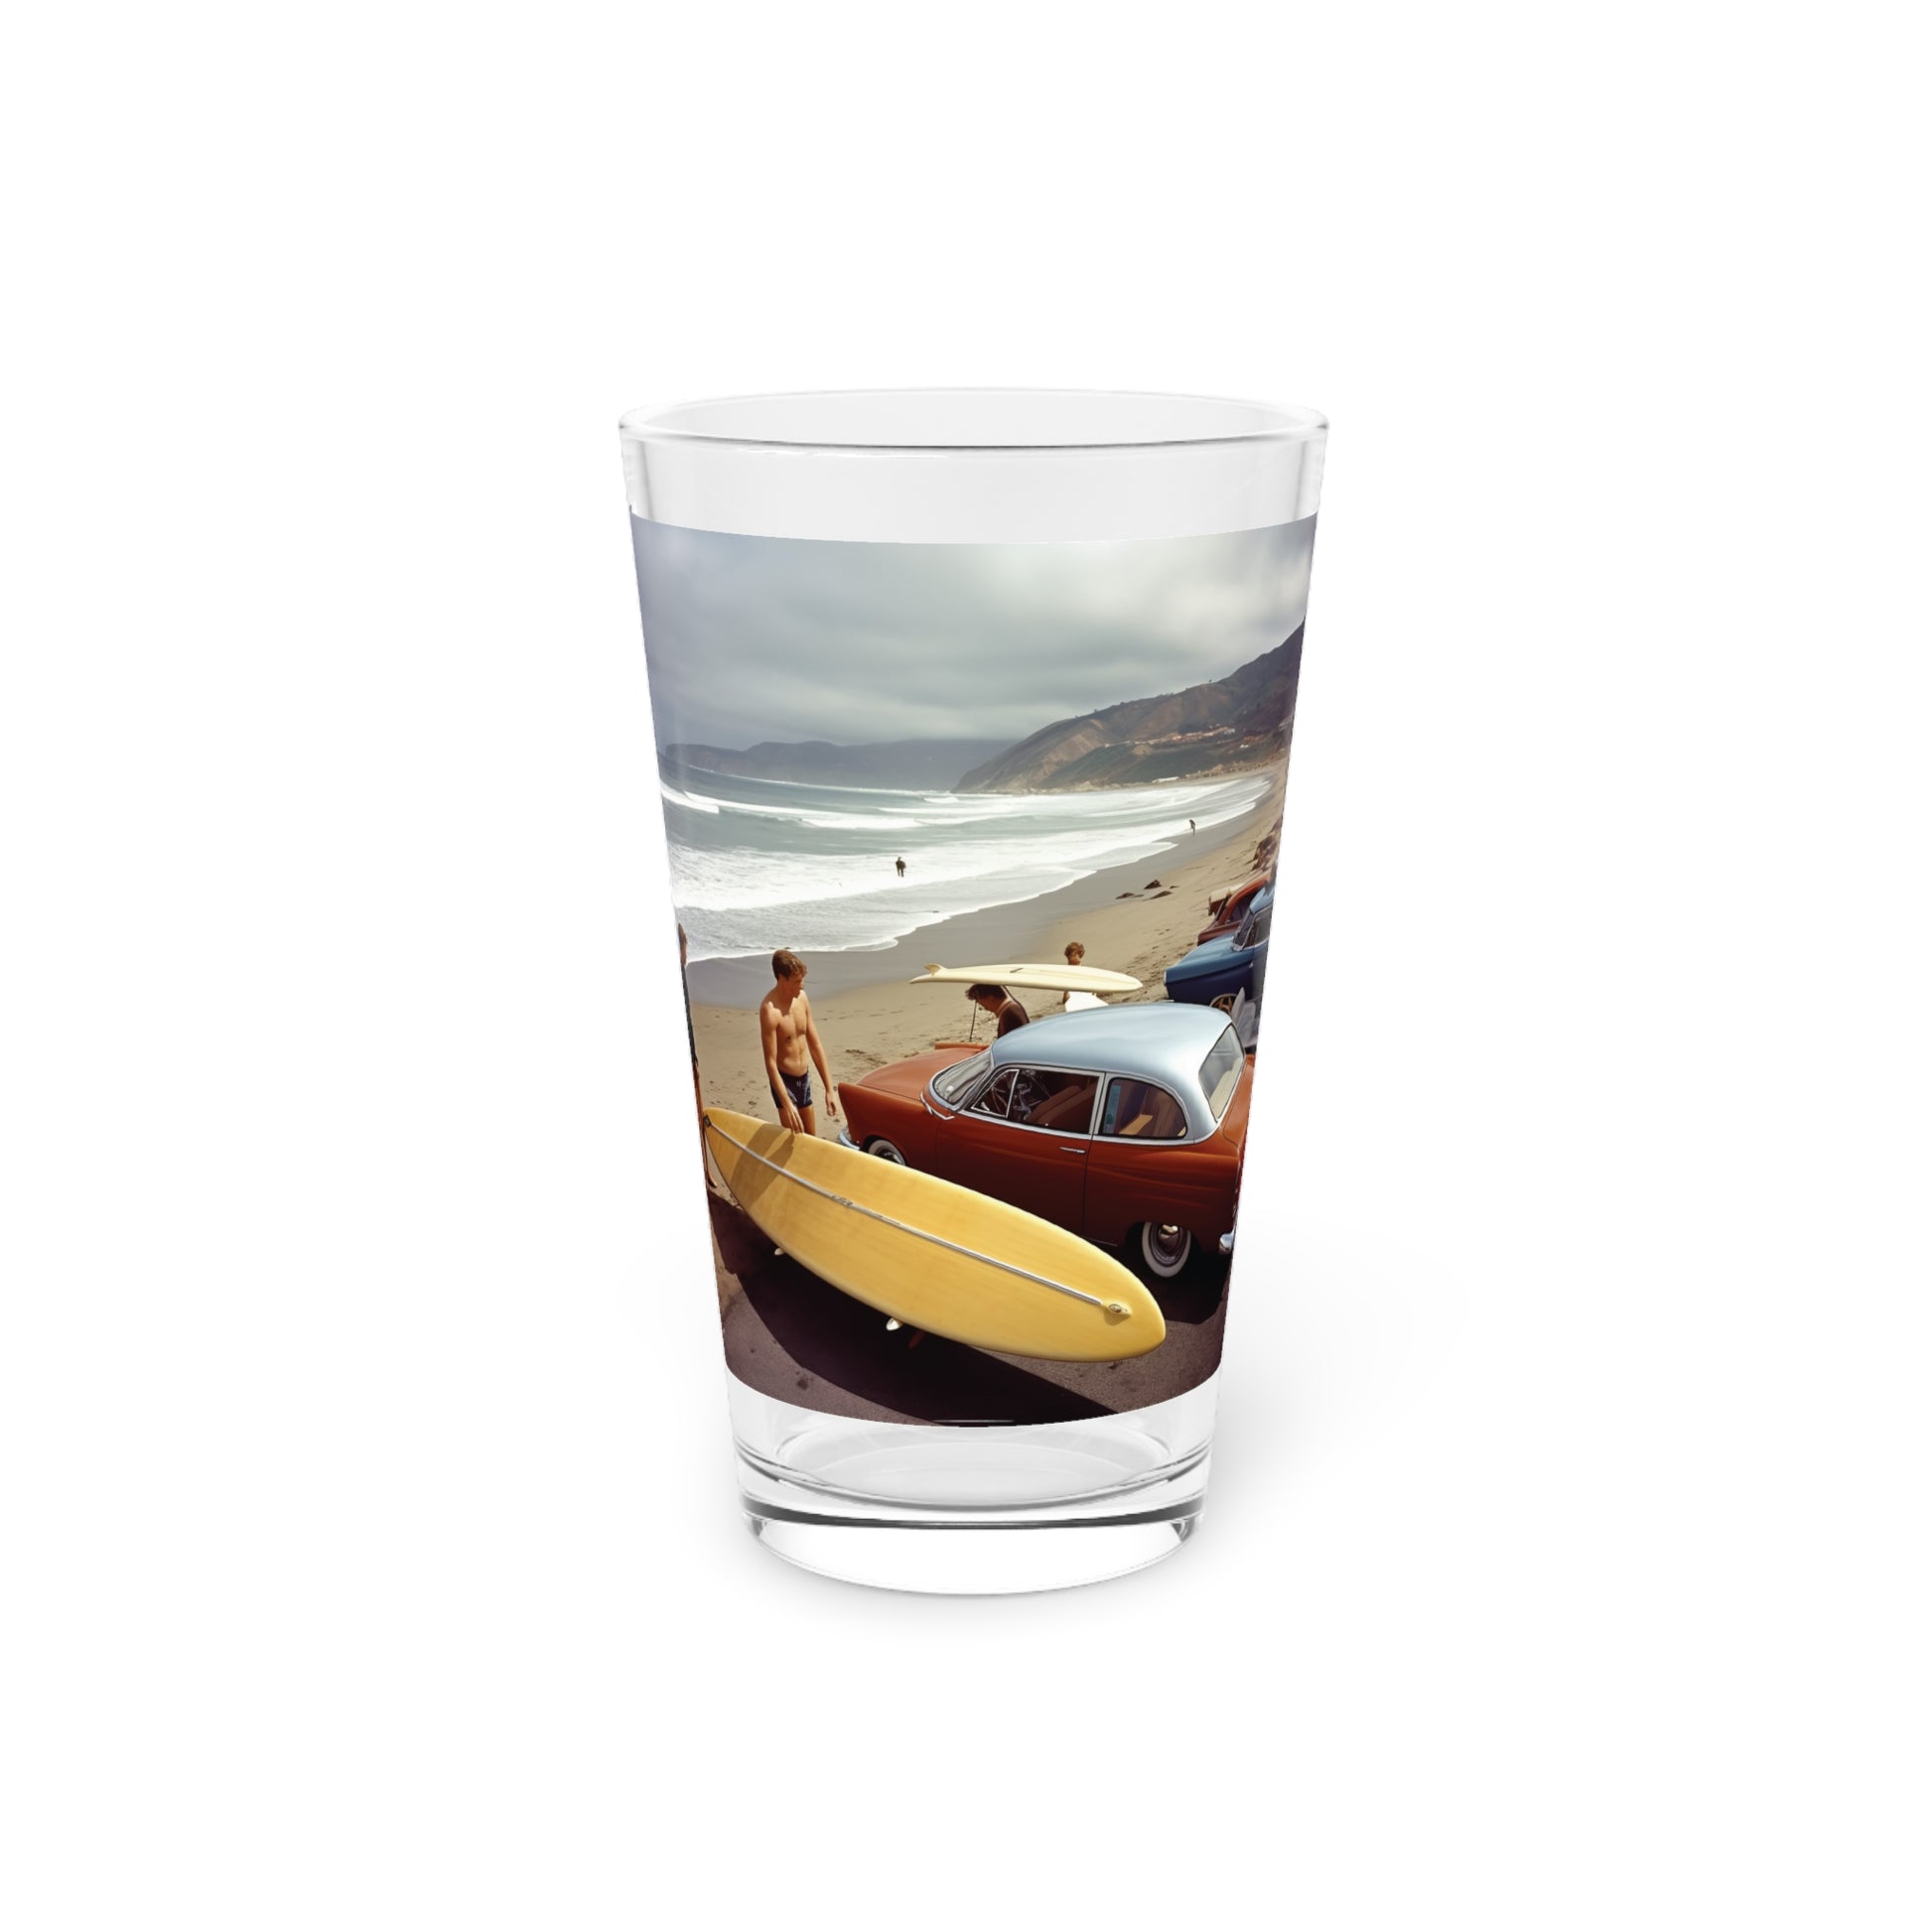 Ride the waves of history with our Malibu California 1958 Surf Spot Pint Glass, Design #023. Your beverage, your journey into surf culture, exclusively at Stashbox.ai.